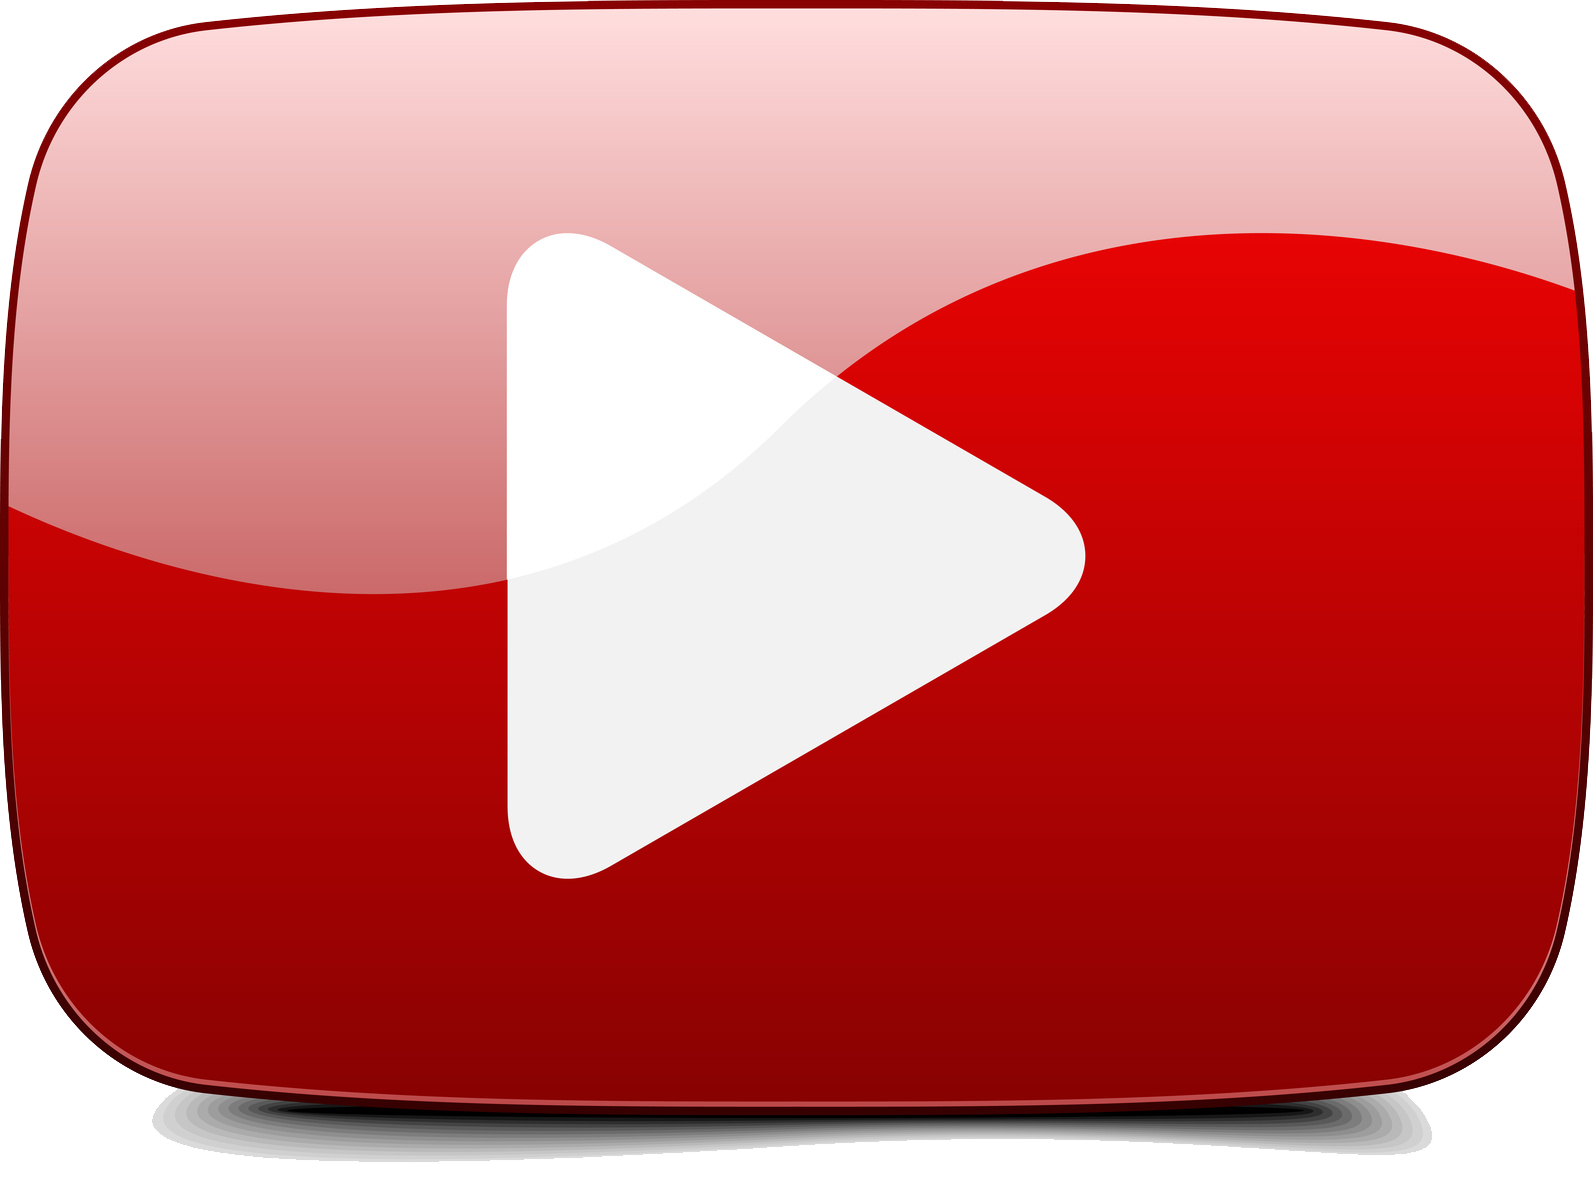 Youtube Play Button Photos PNG Image